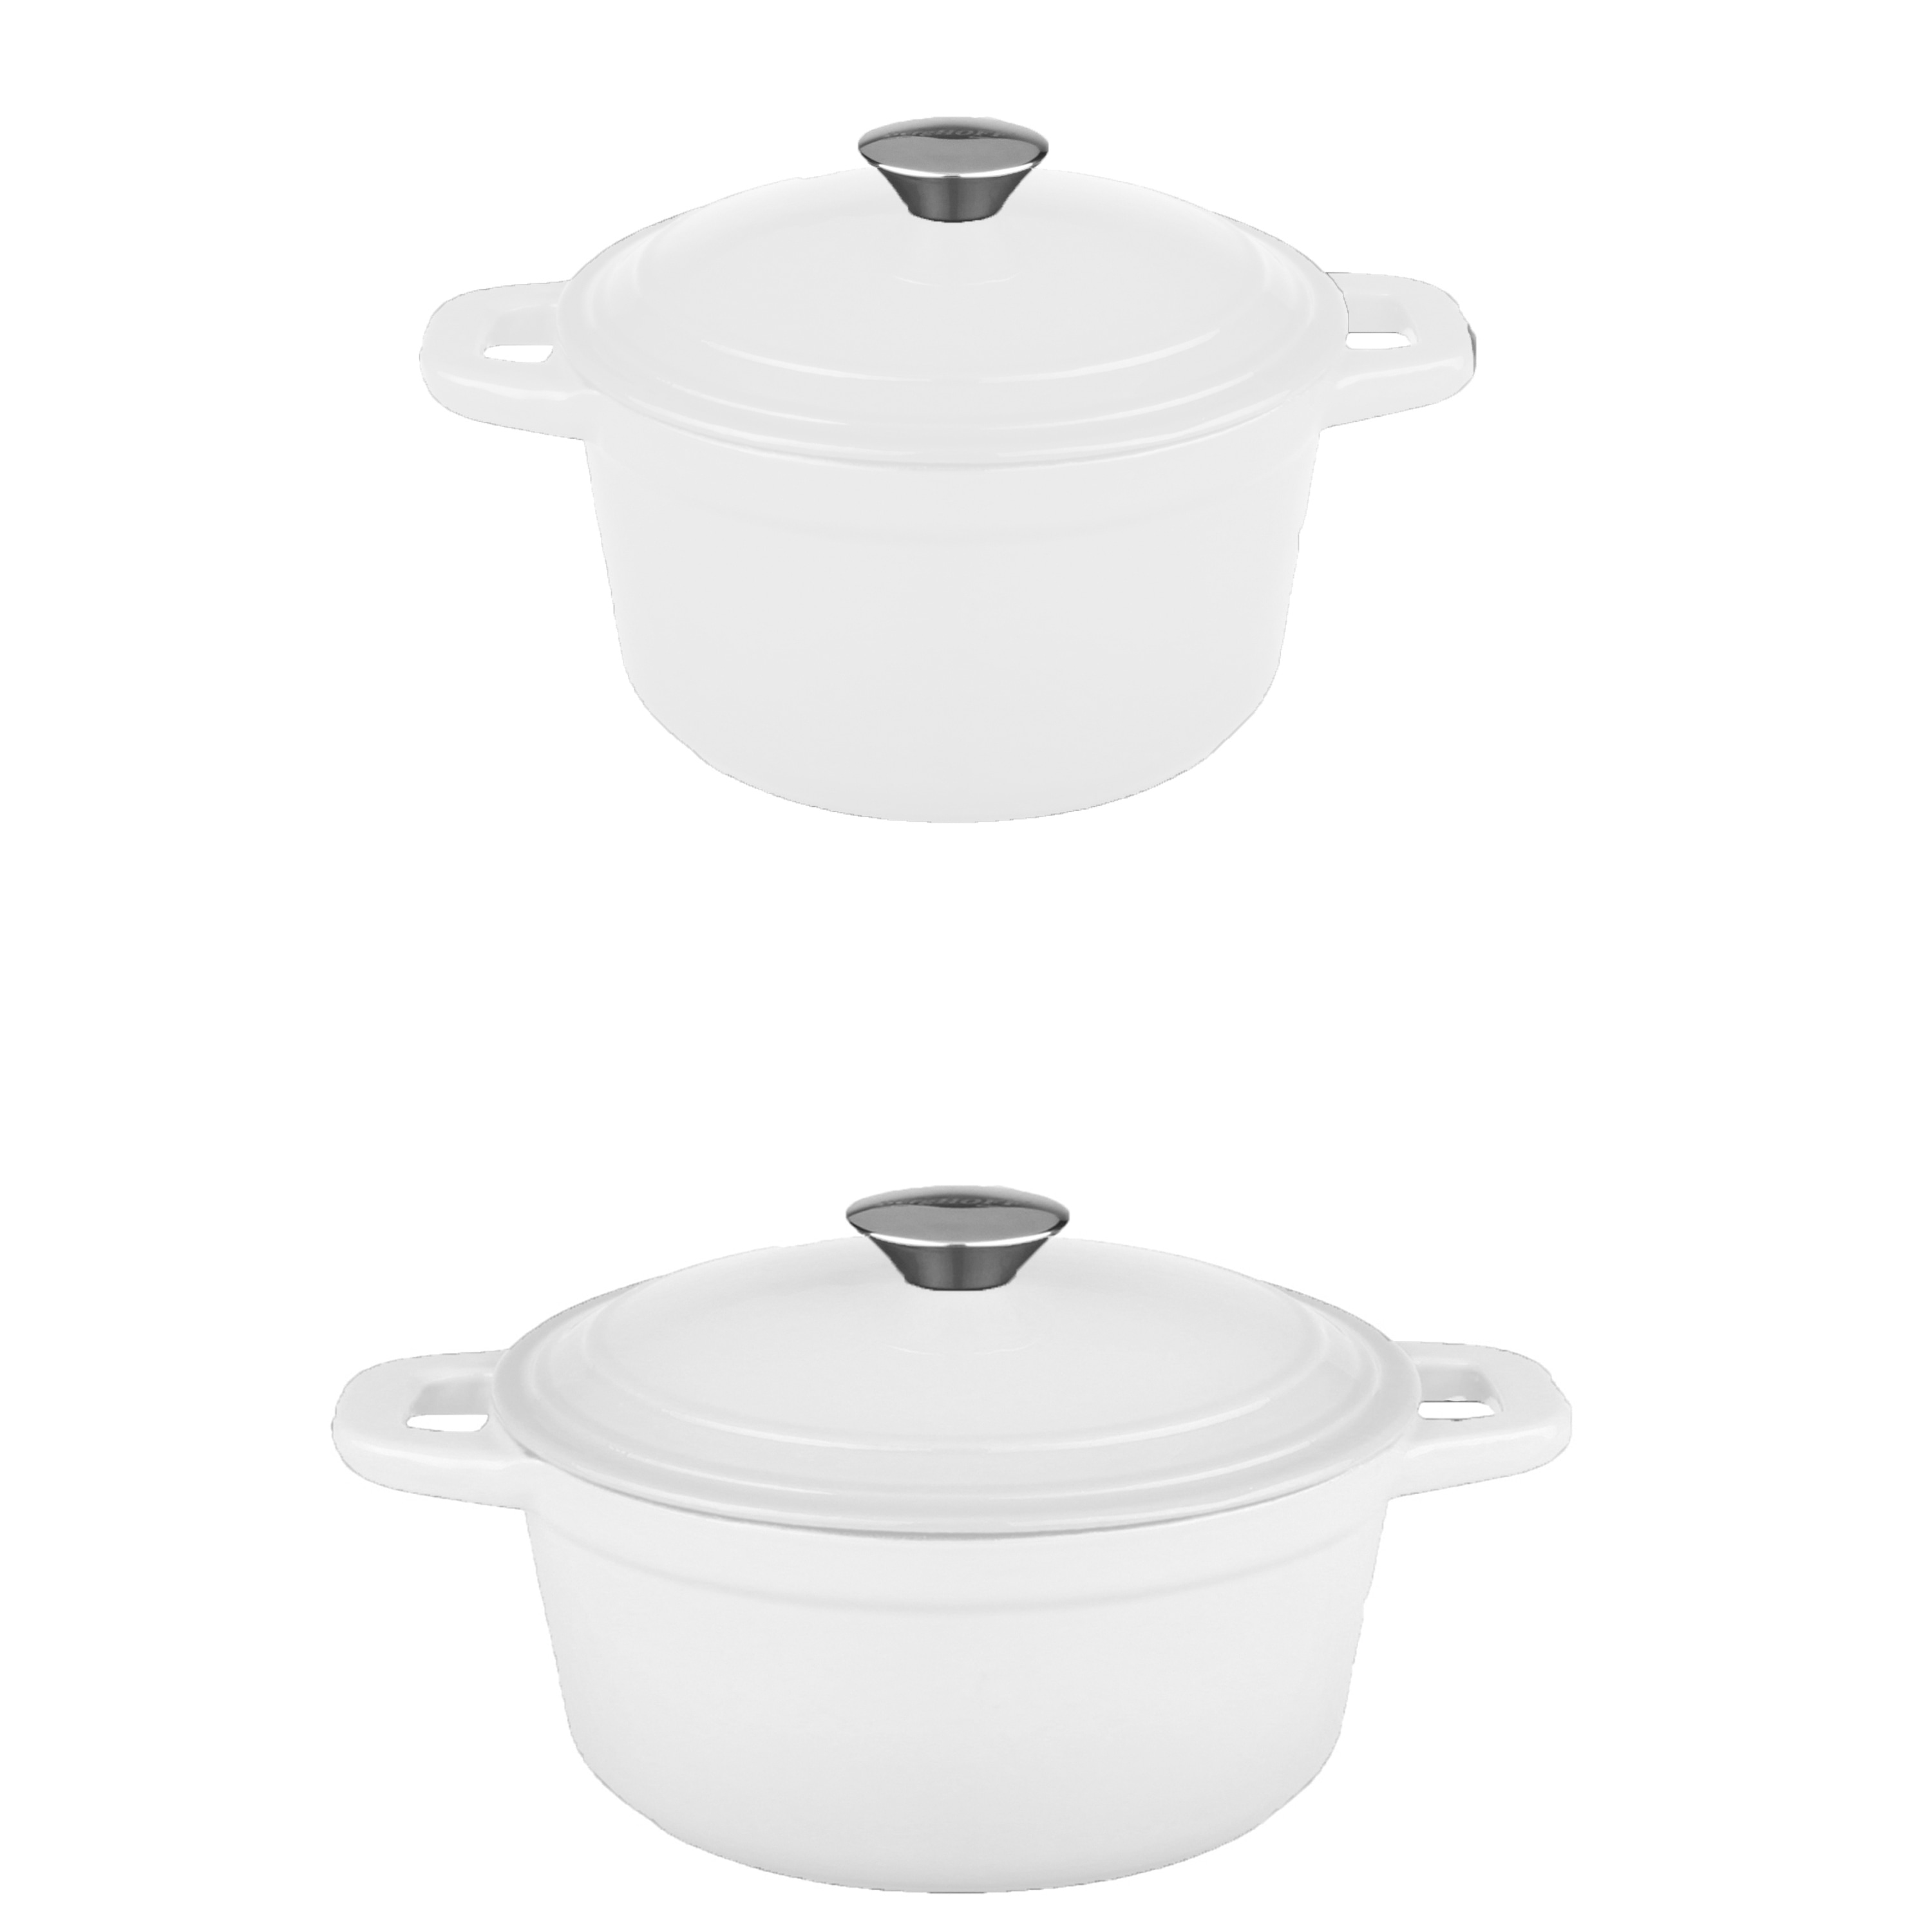 https://ak1.ostkcdn.com/images/products/is/images/direct/3ddf93eb081428c4d77d7e1ebdd534b3ff2e34b1/Neo-4pc-Cast-Iron-Set-3qt-Covered-Stockpot-%26-7qt-Covered-Stockpot-White.jpg